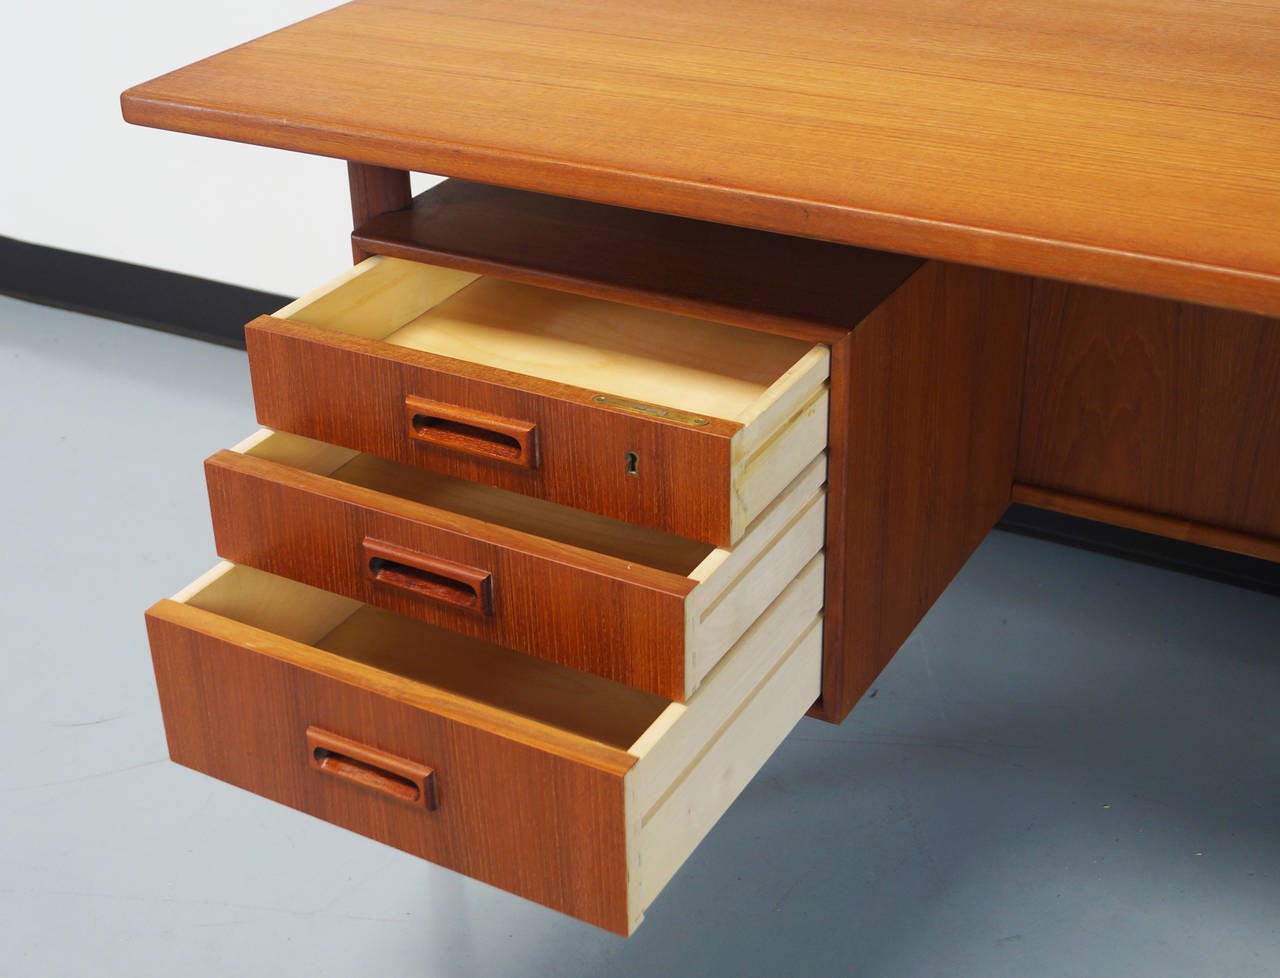 Danish modern floating top desk features three drawers on the left side and one file cabinet to the right. A rear storage space for display.